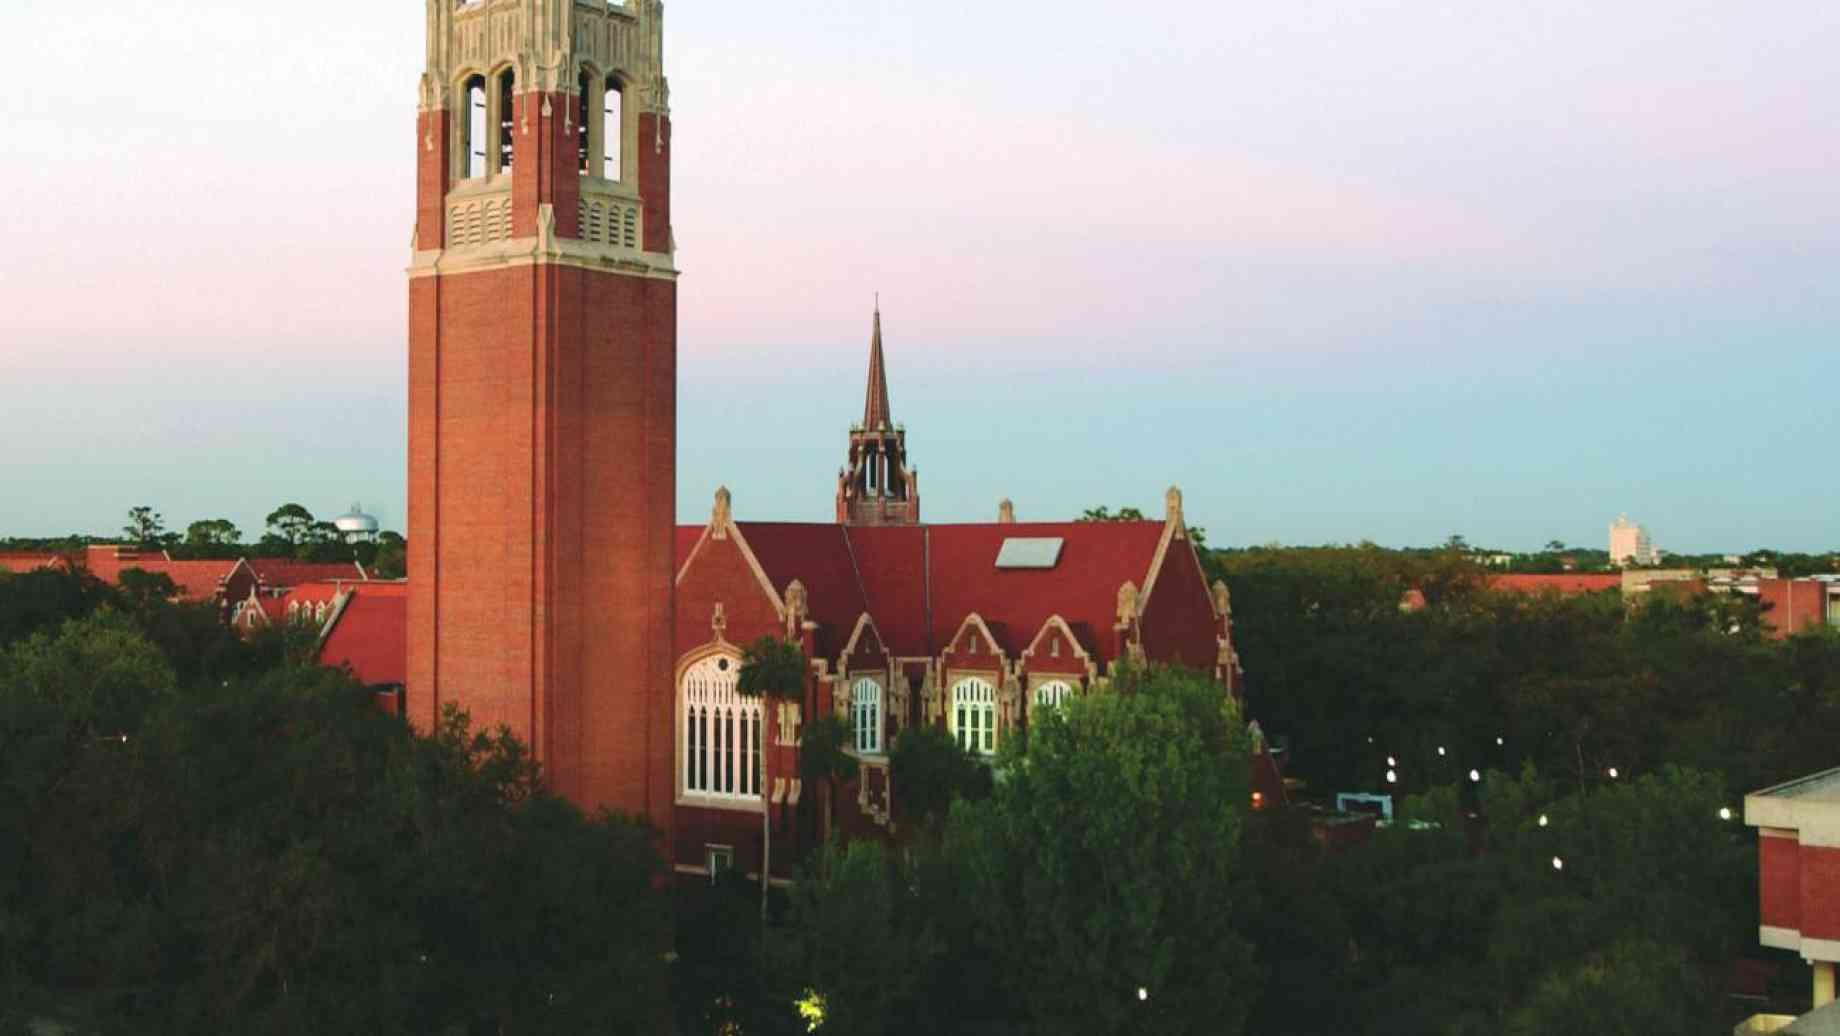 View of Century Tower and the University Auditorium